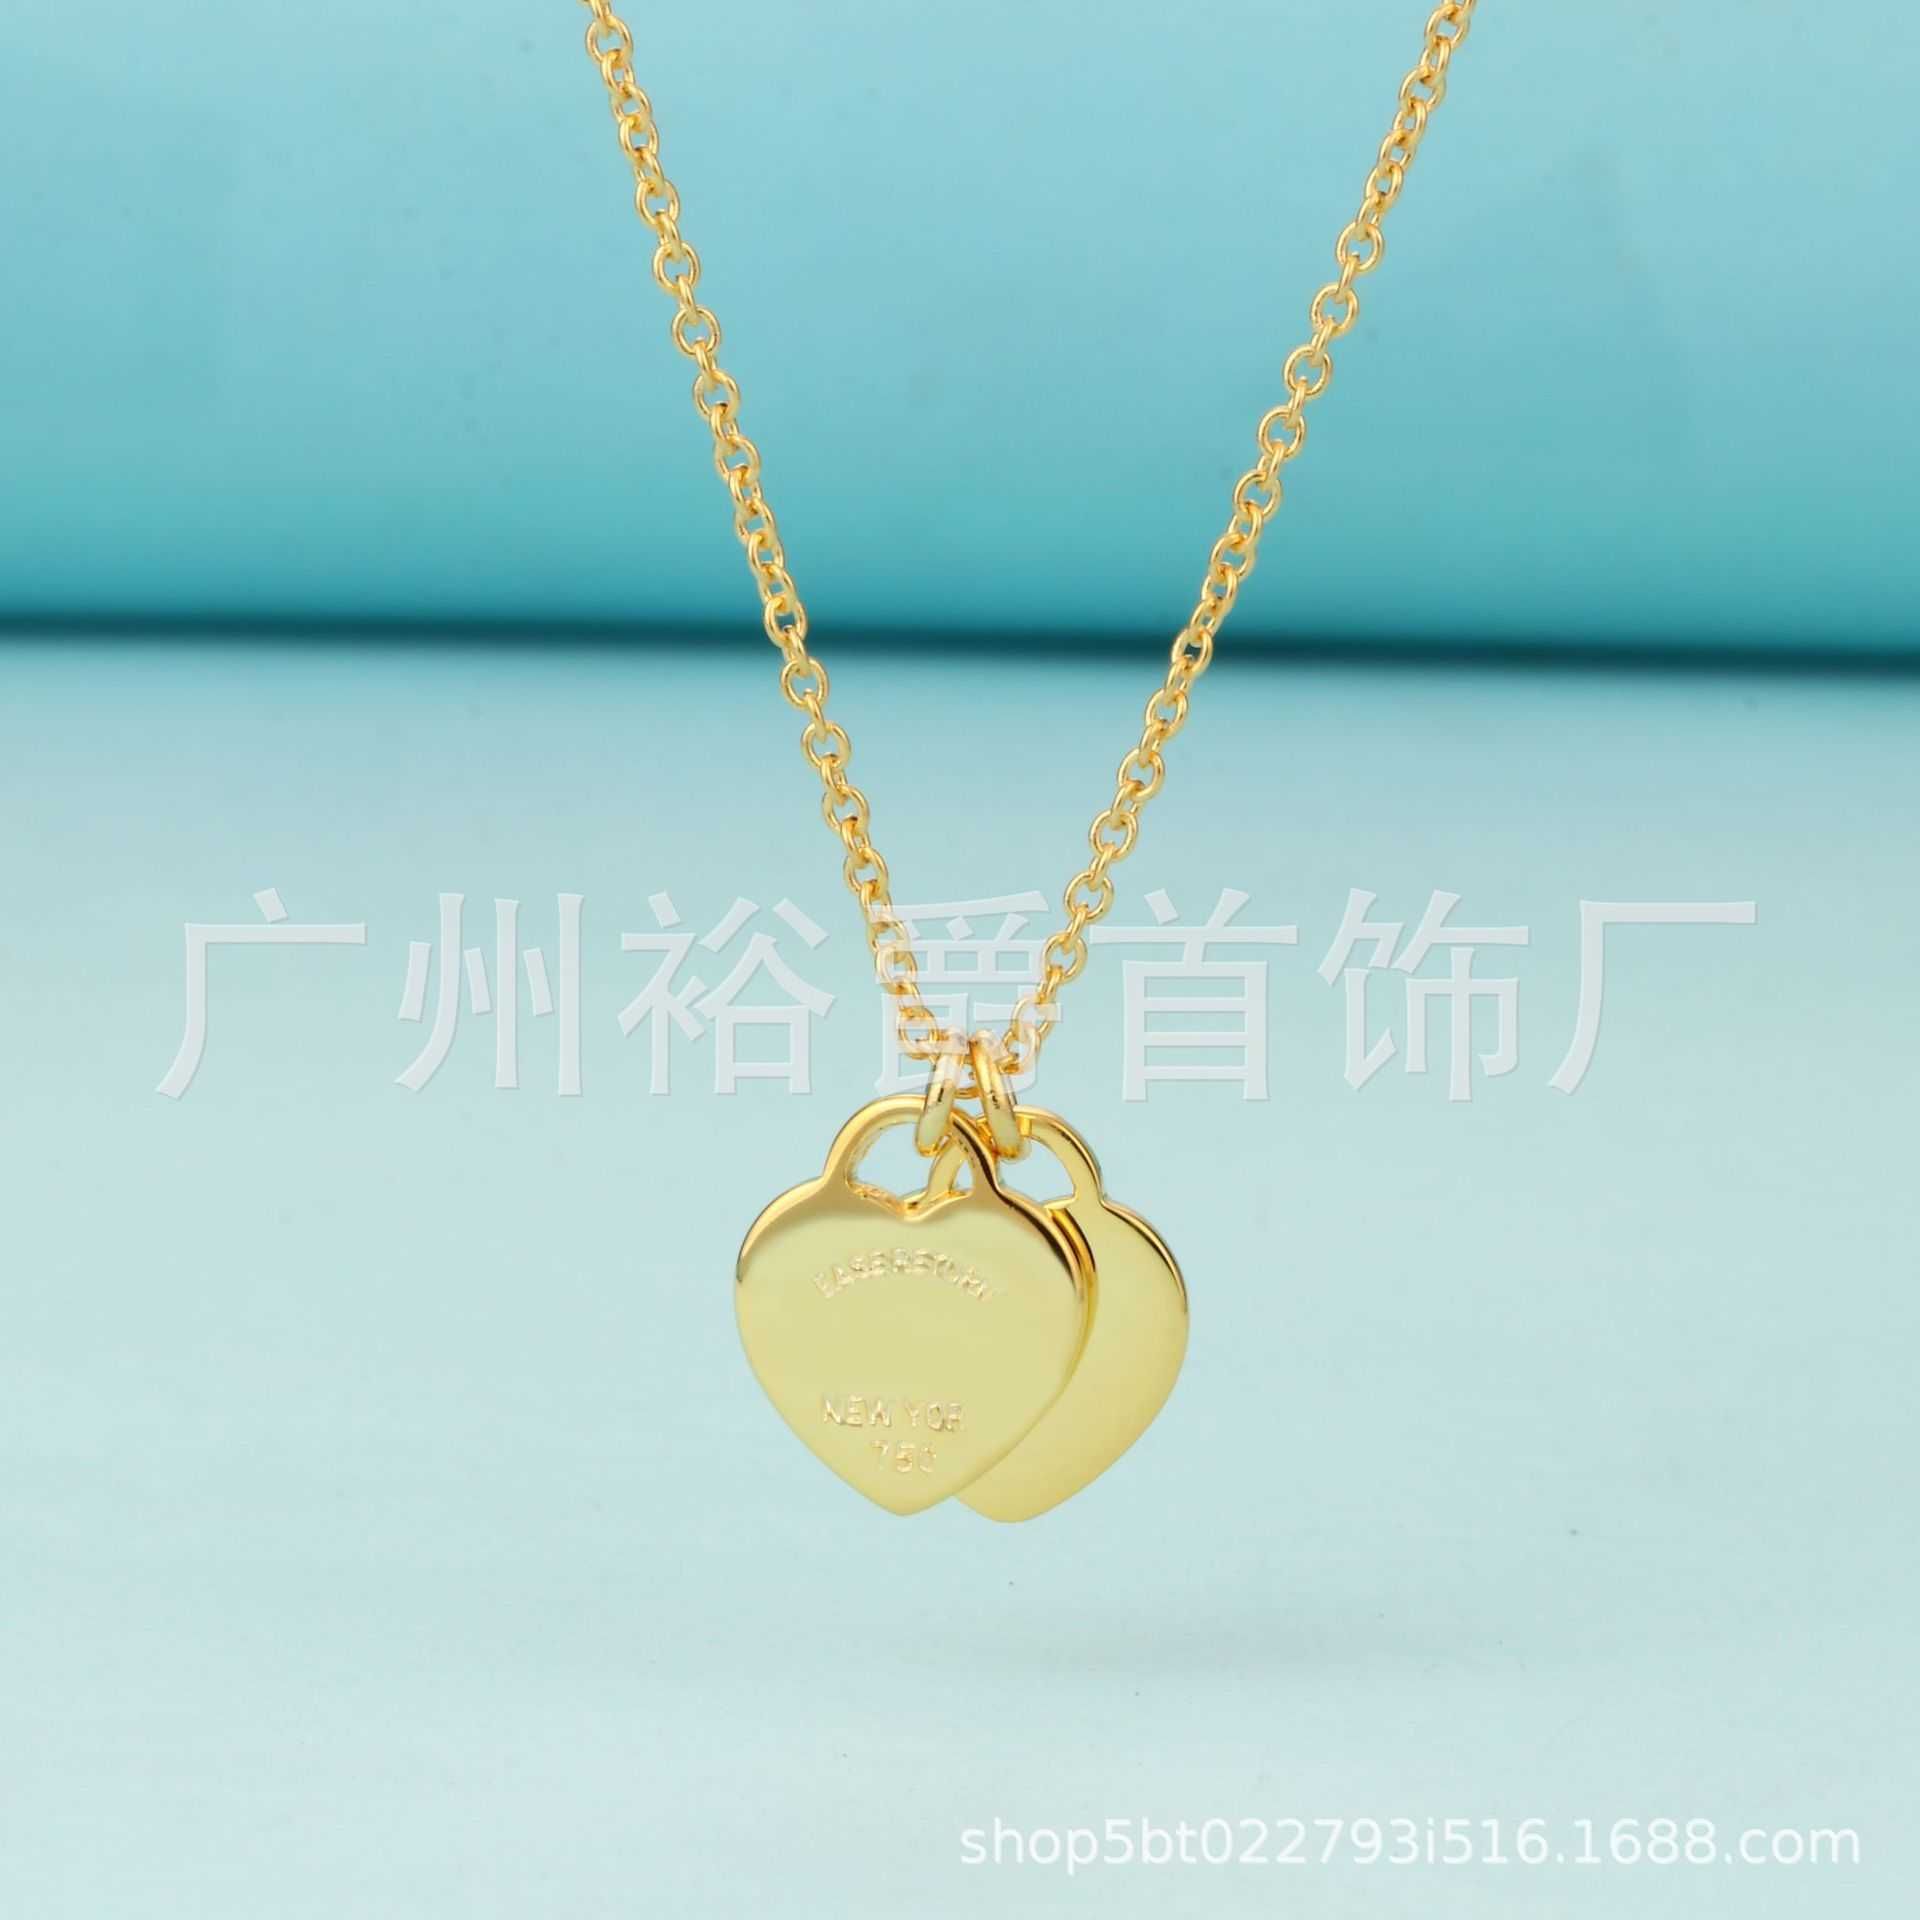 Yellow Gold Colored-45cm